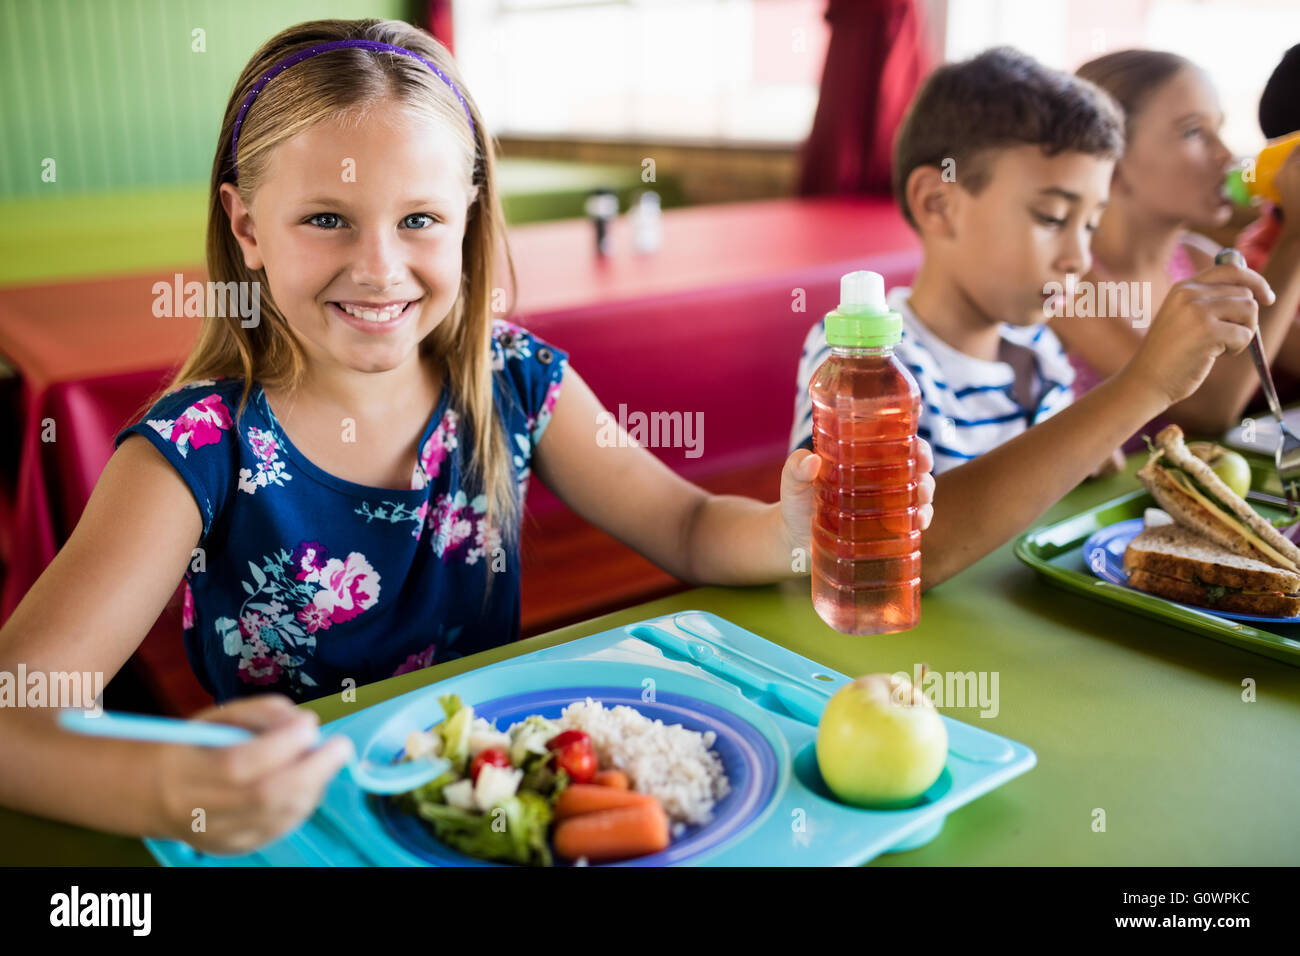 https://c8.alamy.com/comp/G0WPKC/children-eating-at-the-canteen-G0WPKC.jpg